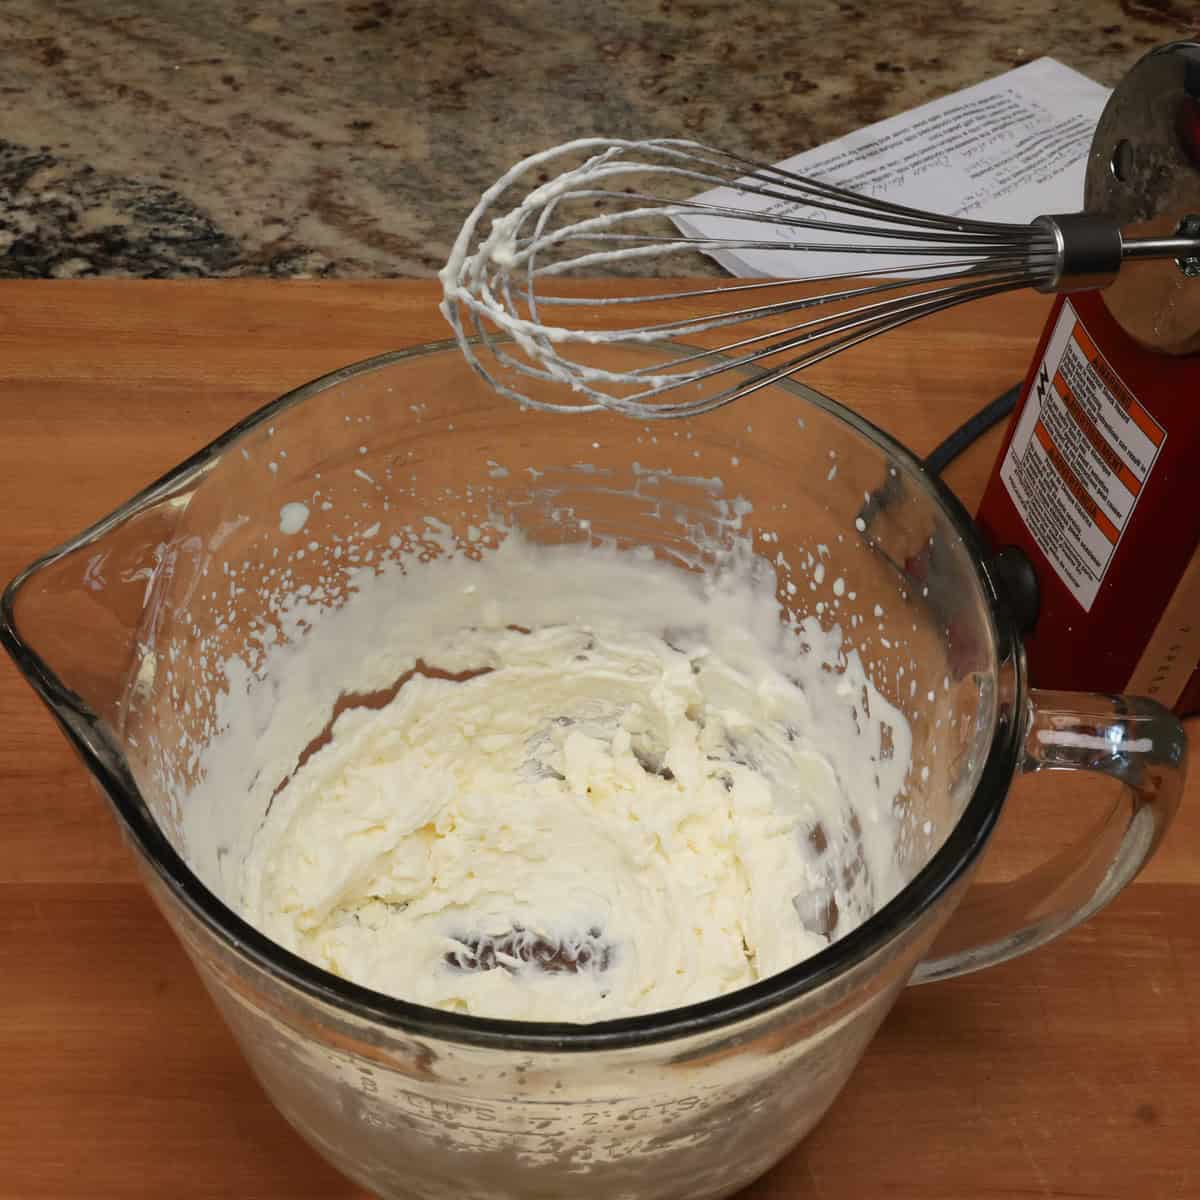 a mixing bowl filled with whipped cream.